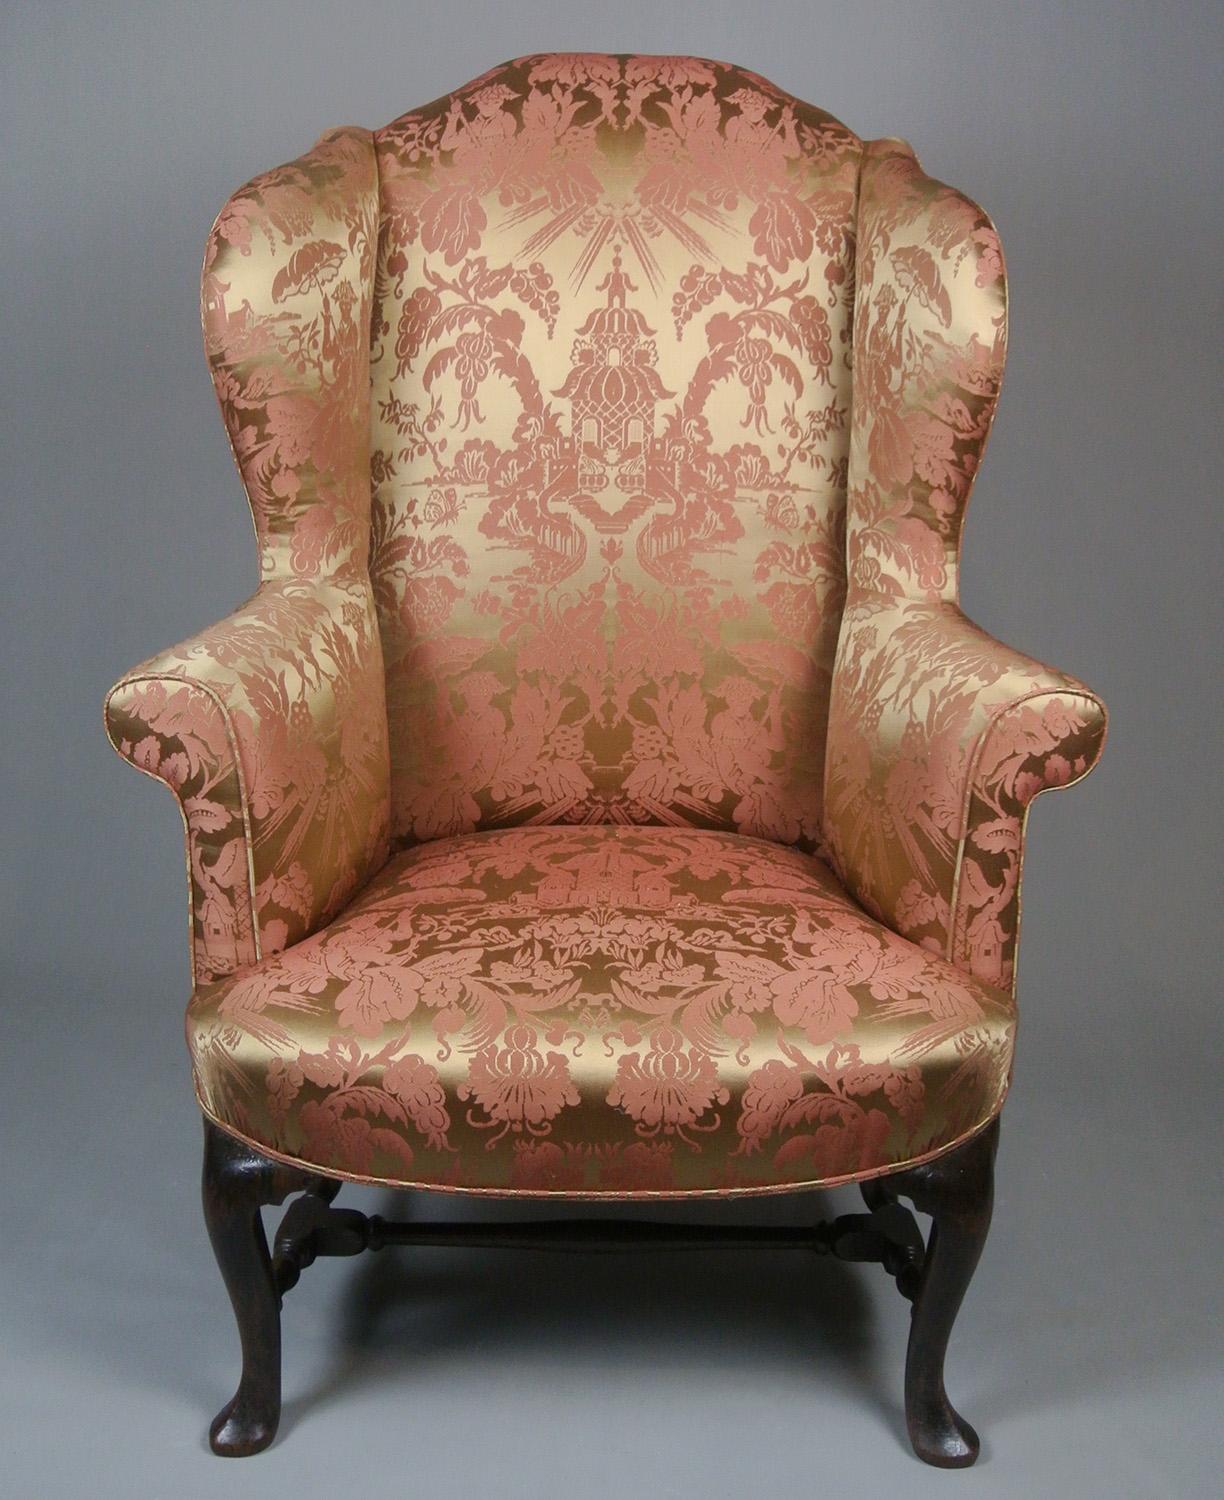 A very fine early 19th Century mahogany wingback armchair dating from c. 1715 with tall, elegant, slightly cabriole legs to the front terminating in puddle-pad feet and raked legs to rear and joined by finely turned original stretchers.

 The tall